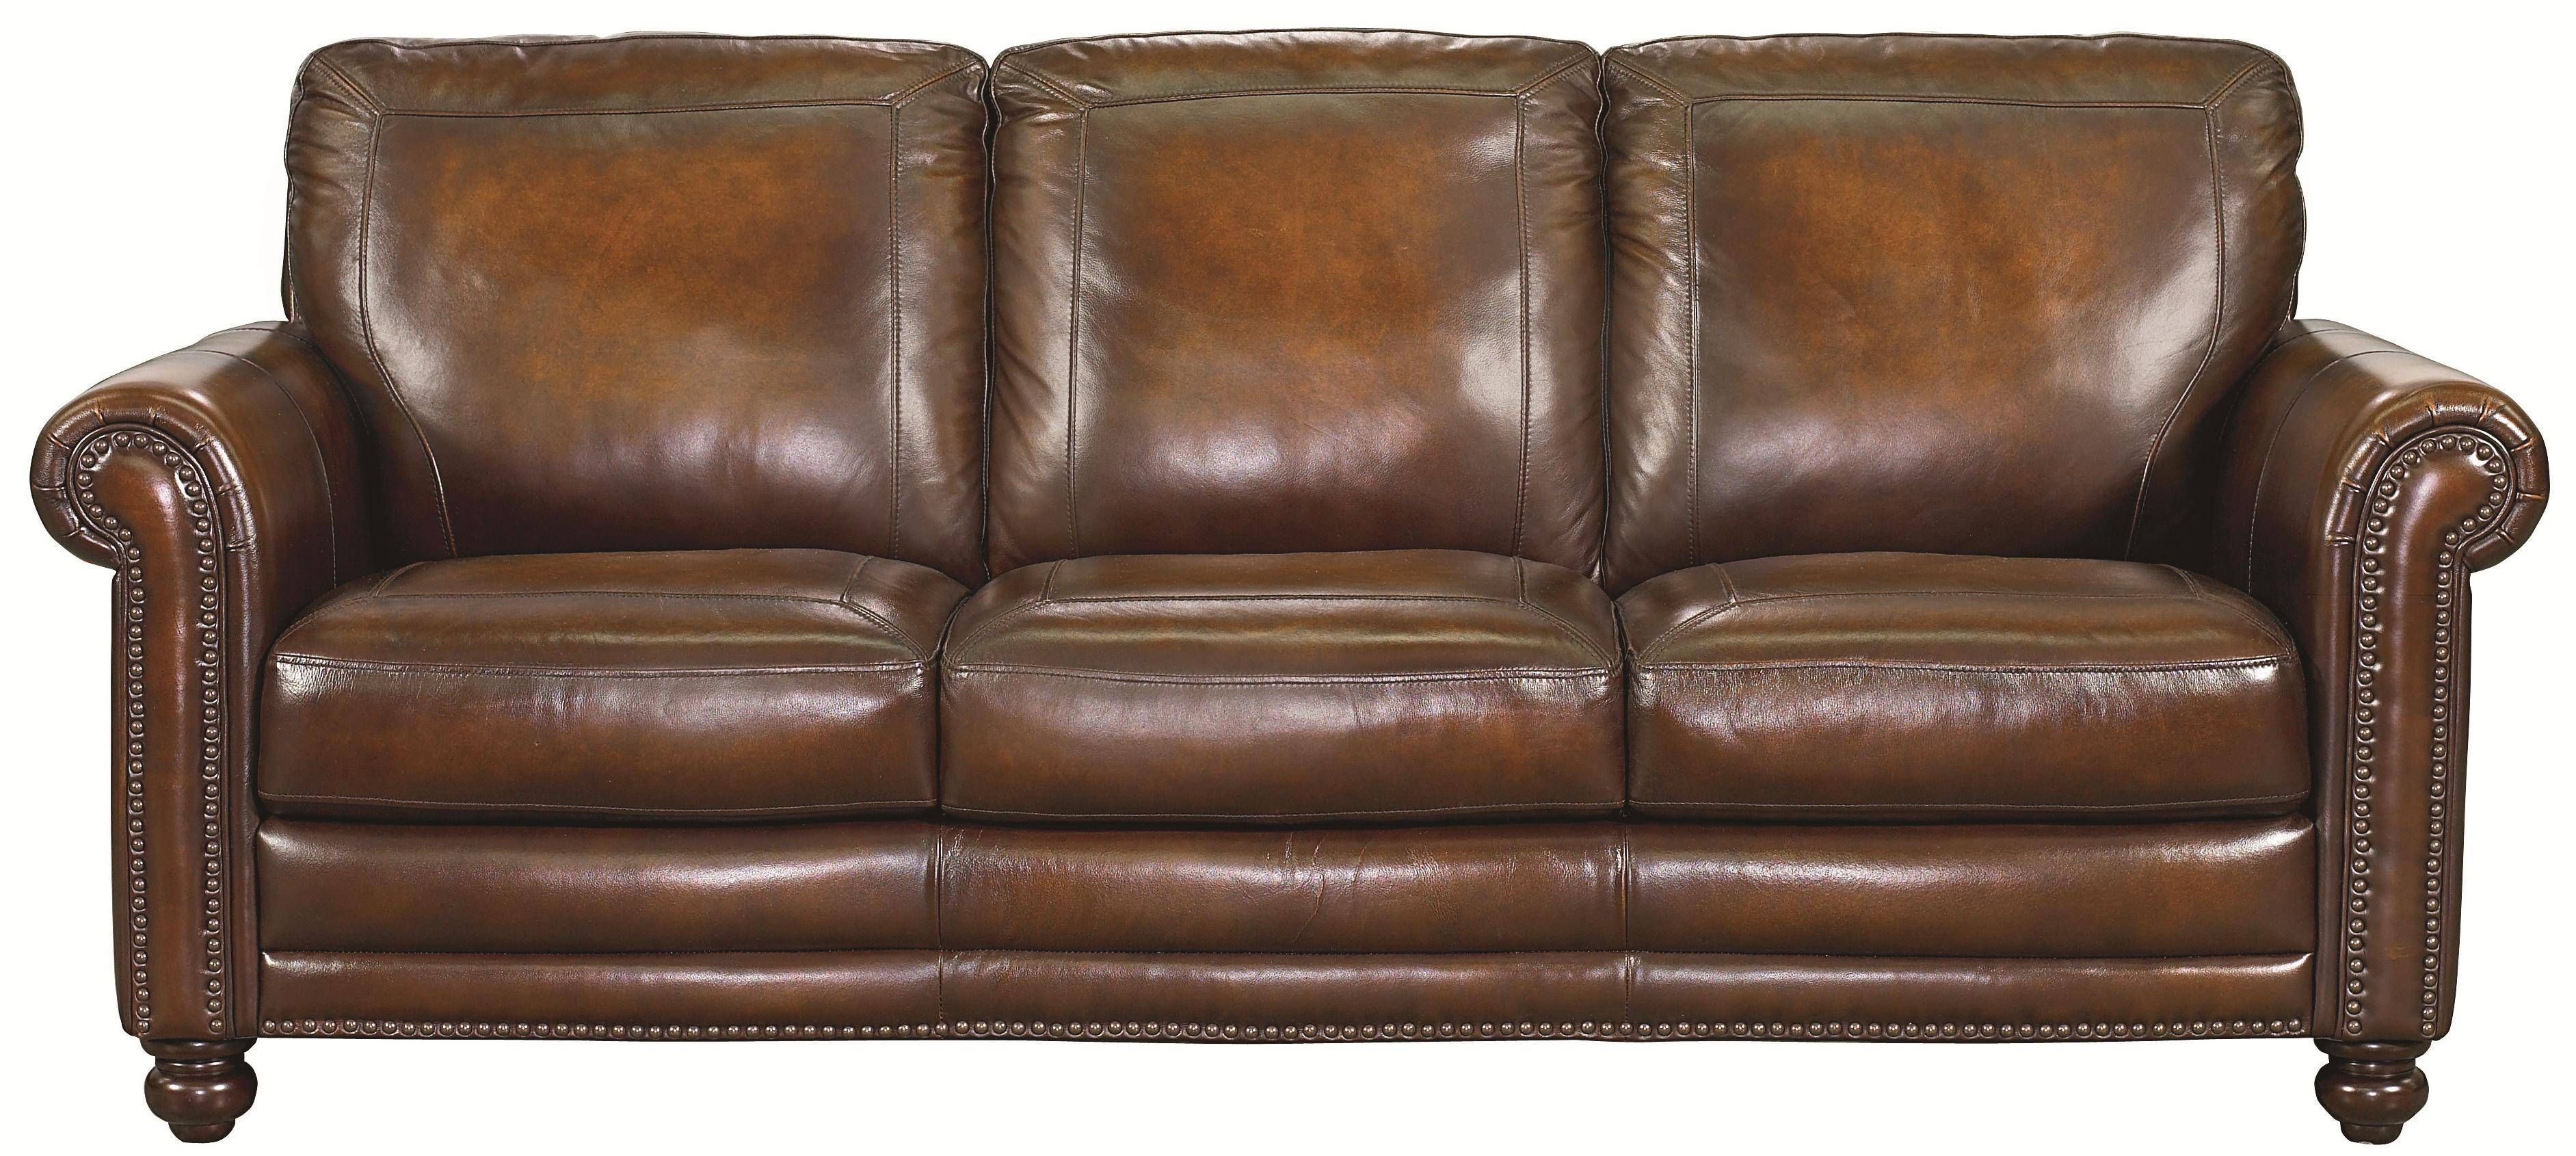 Bassett Hamilton Traditional Sofa With Nail Head Trim – Great Inside Brown Leather Sofas With Nailhead Trim (View 7 of 15)